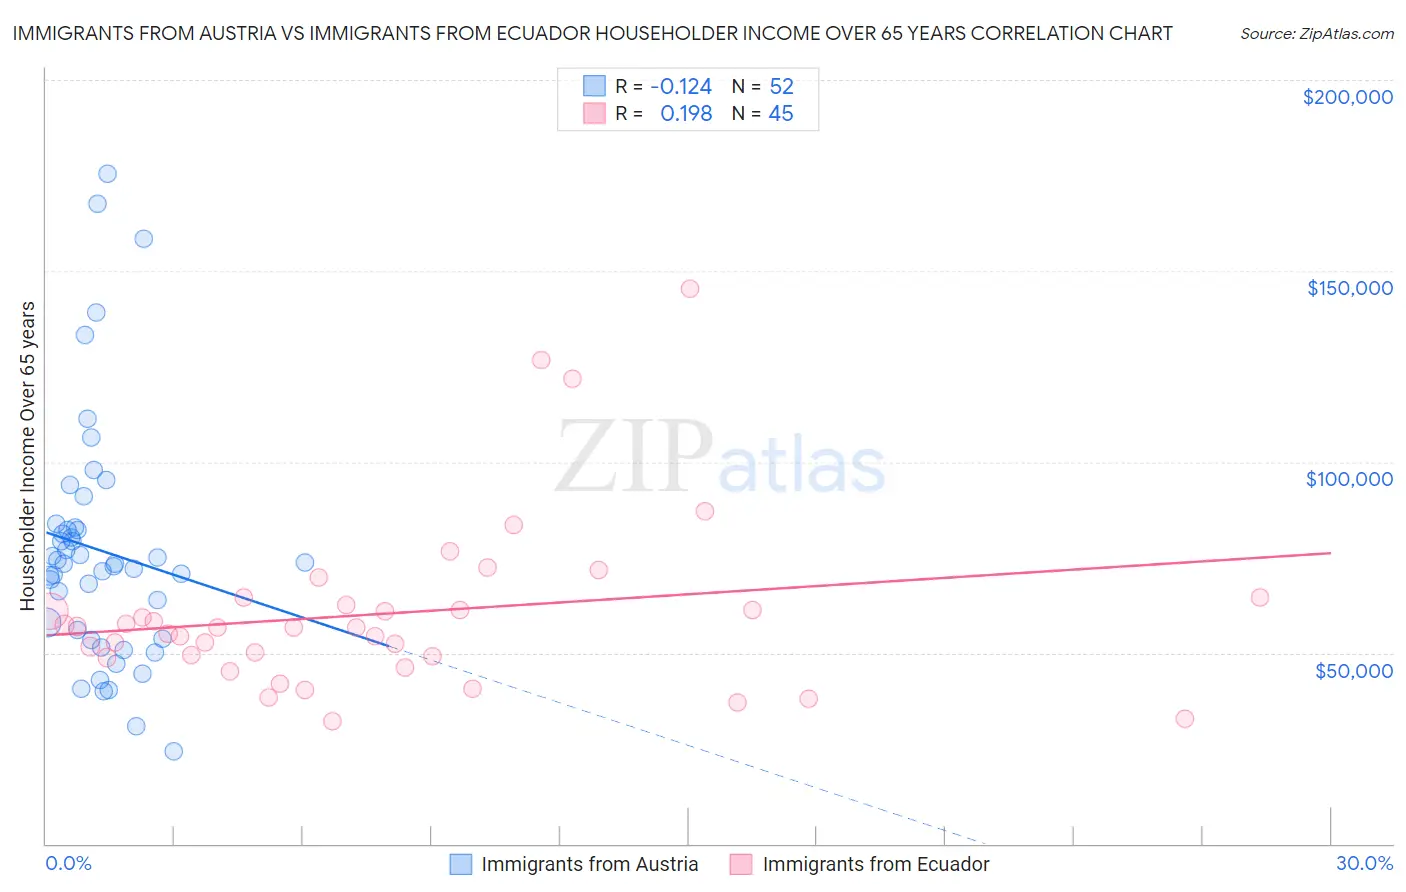 Immigrants from Austria vs Immigrants from Ecuador Householder Income Over 65 years